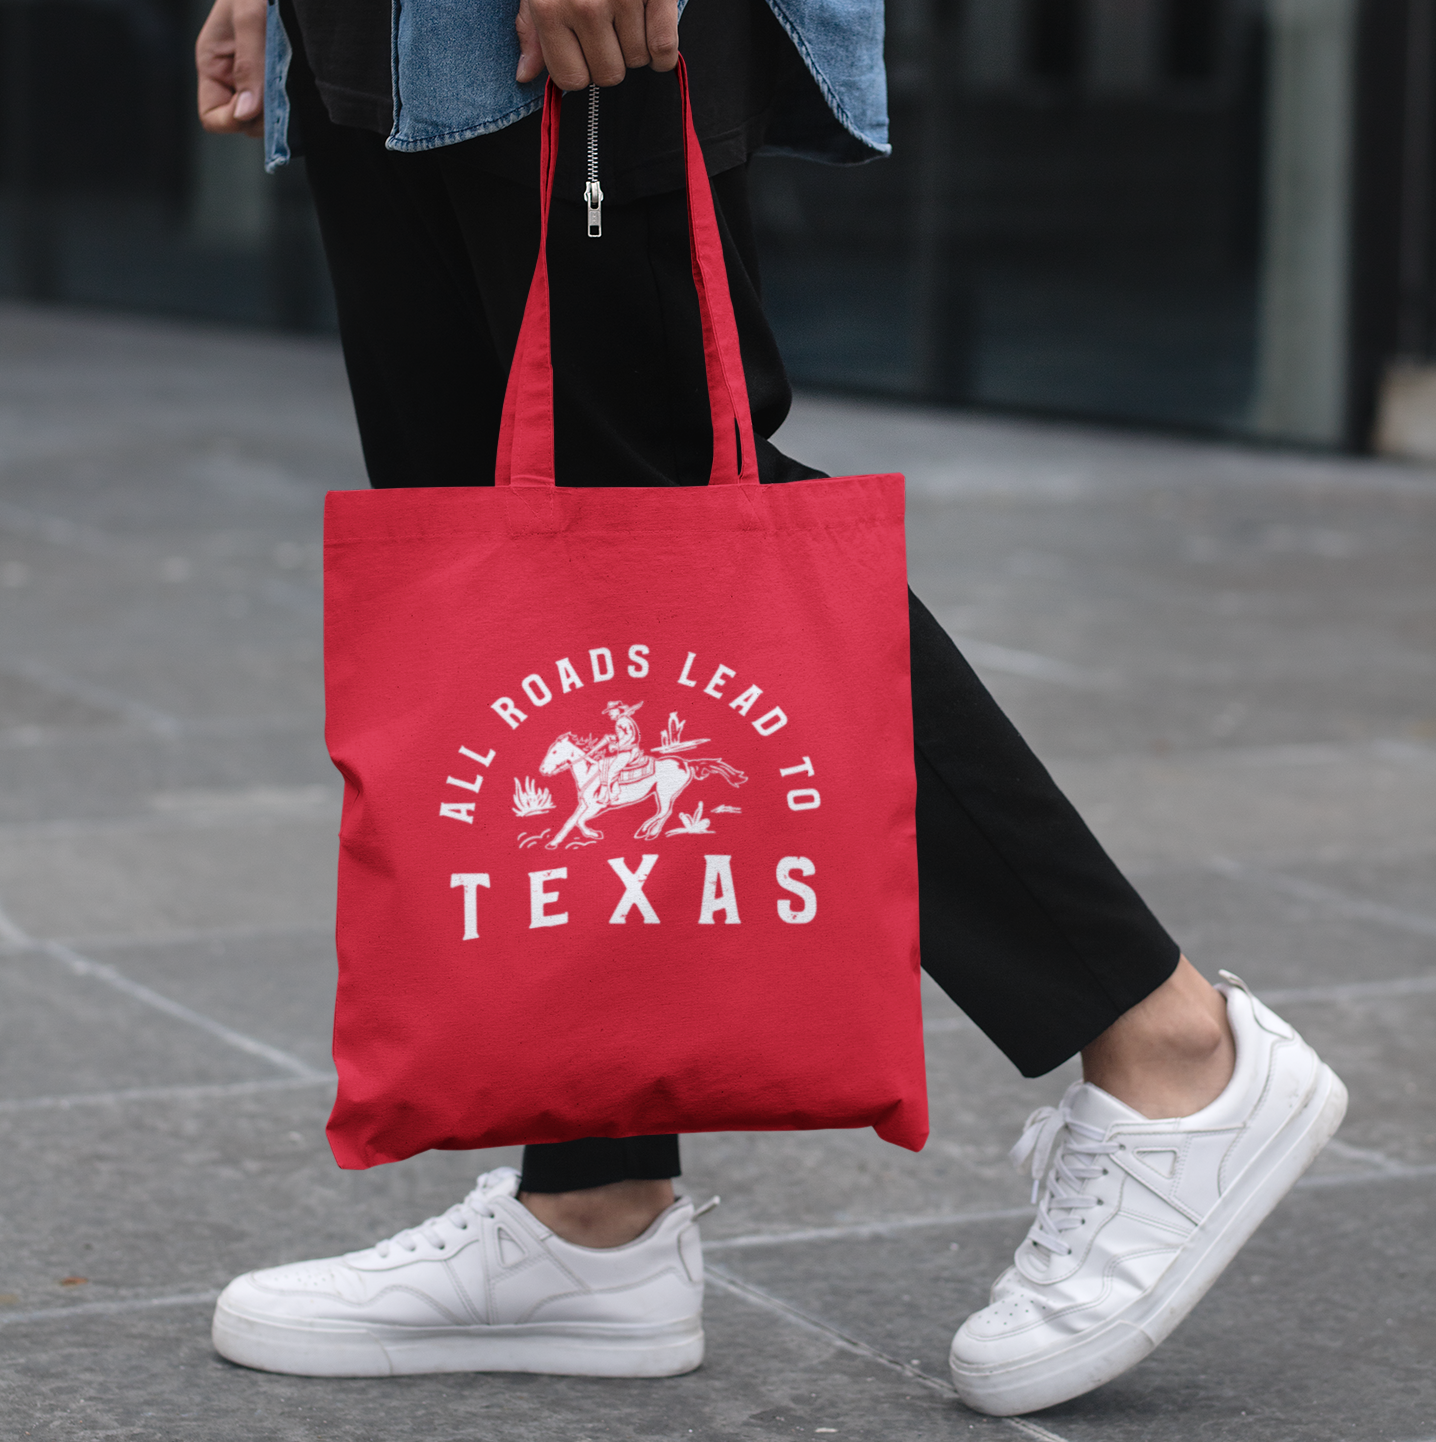 All Roads Lead to Texas Tote